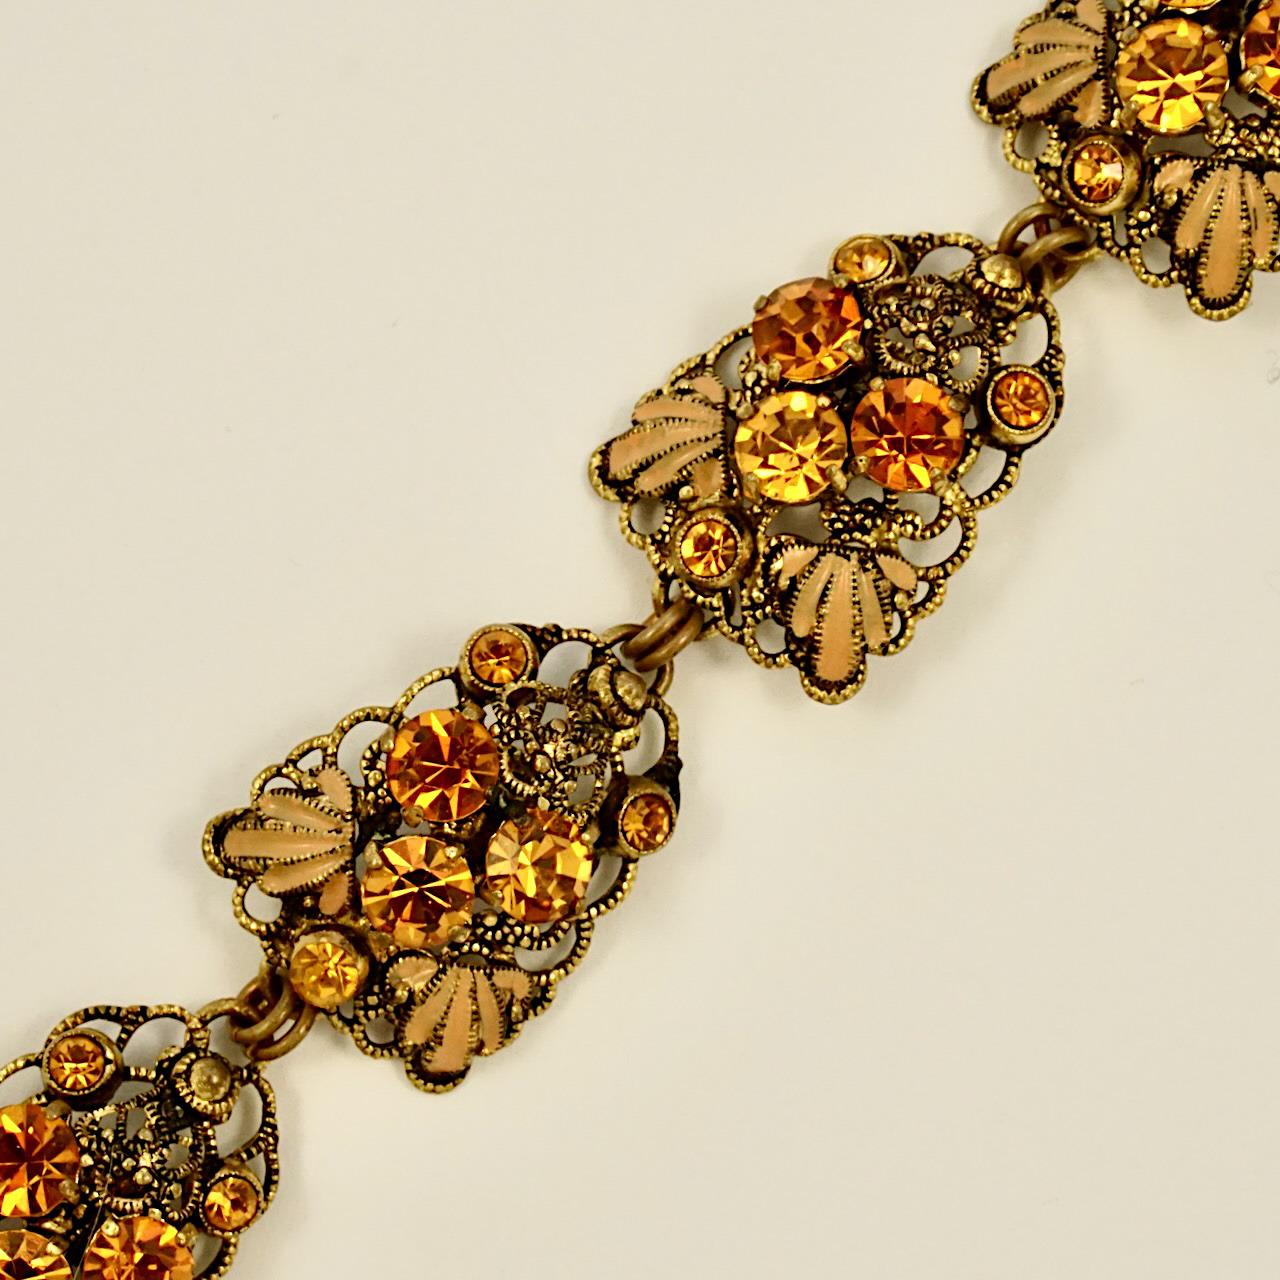 Gold Plated Filigree and Citrine Rhinestone Link Bracelet and Earrings Set In Good Condition For Sale In London, GB